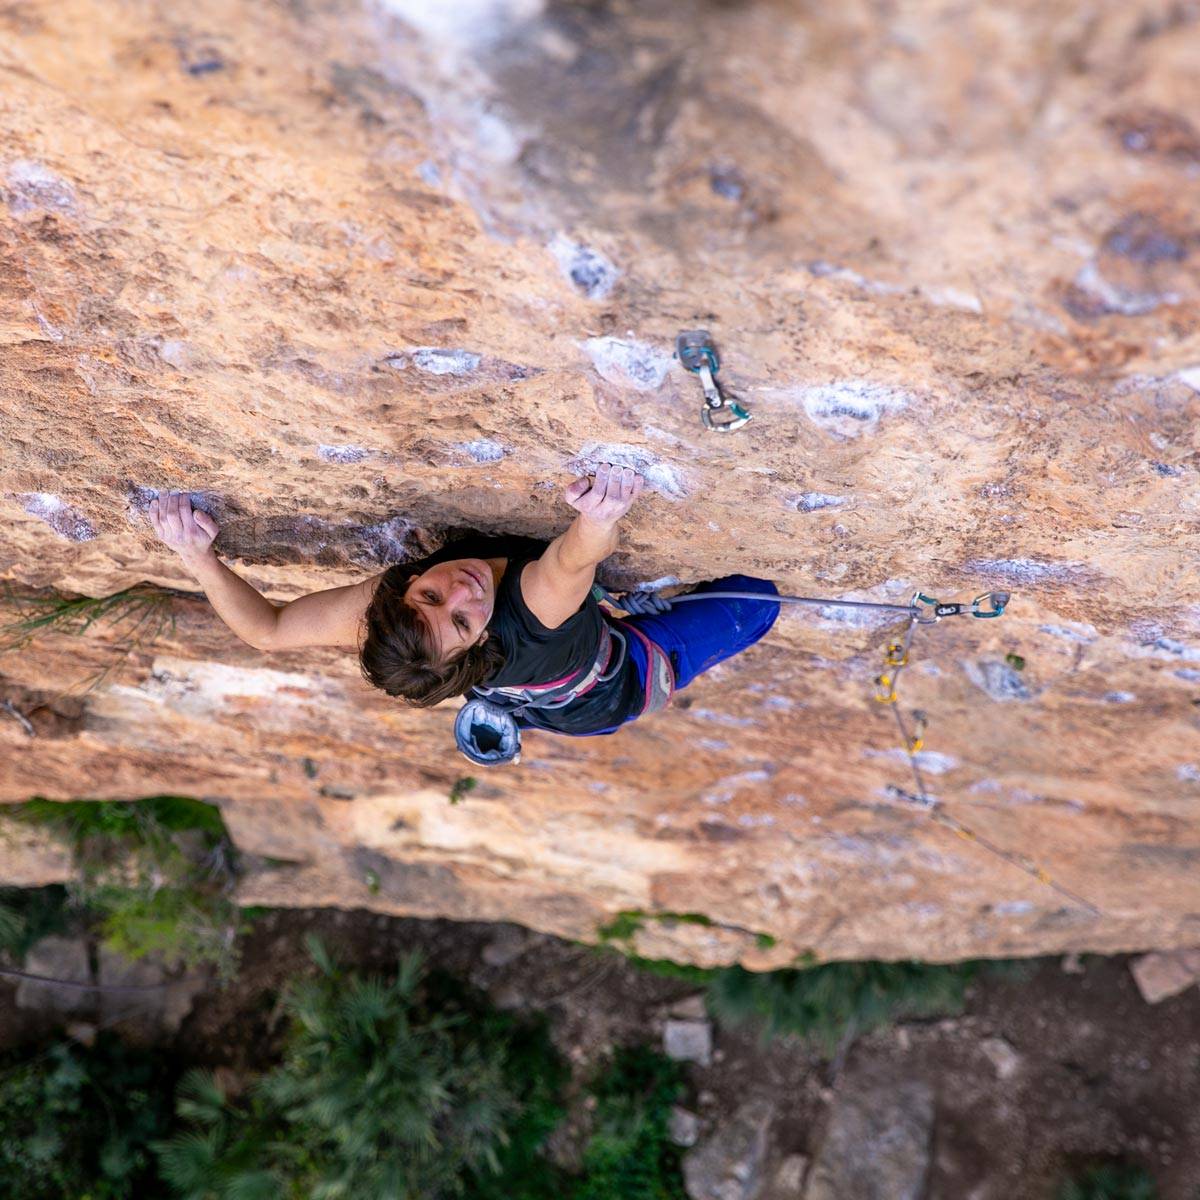 Alice Hafer climbing a chalk-smeared route in Chullia, Spain